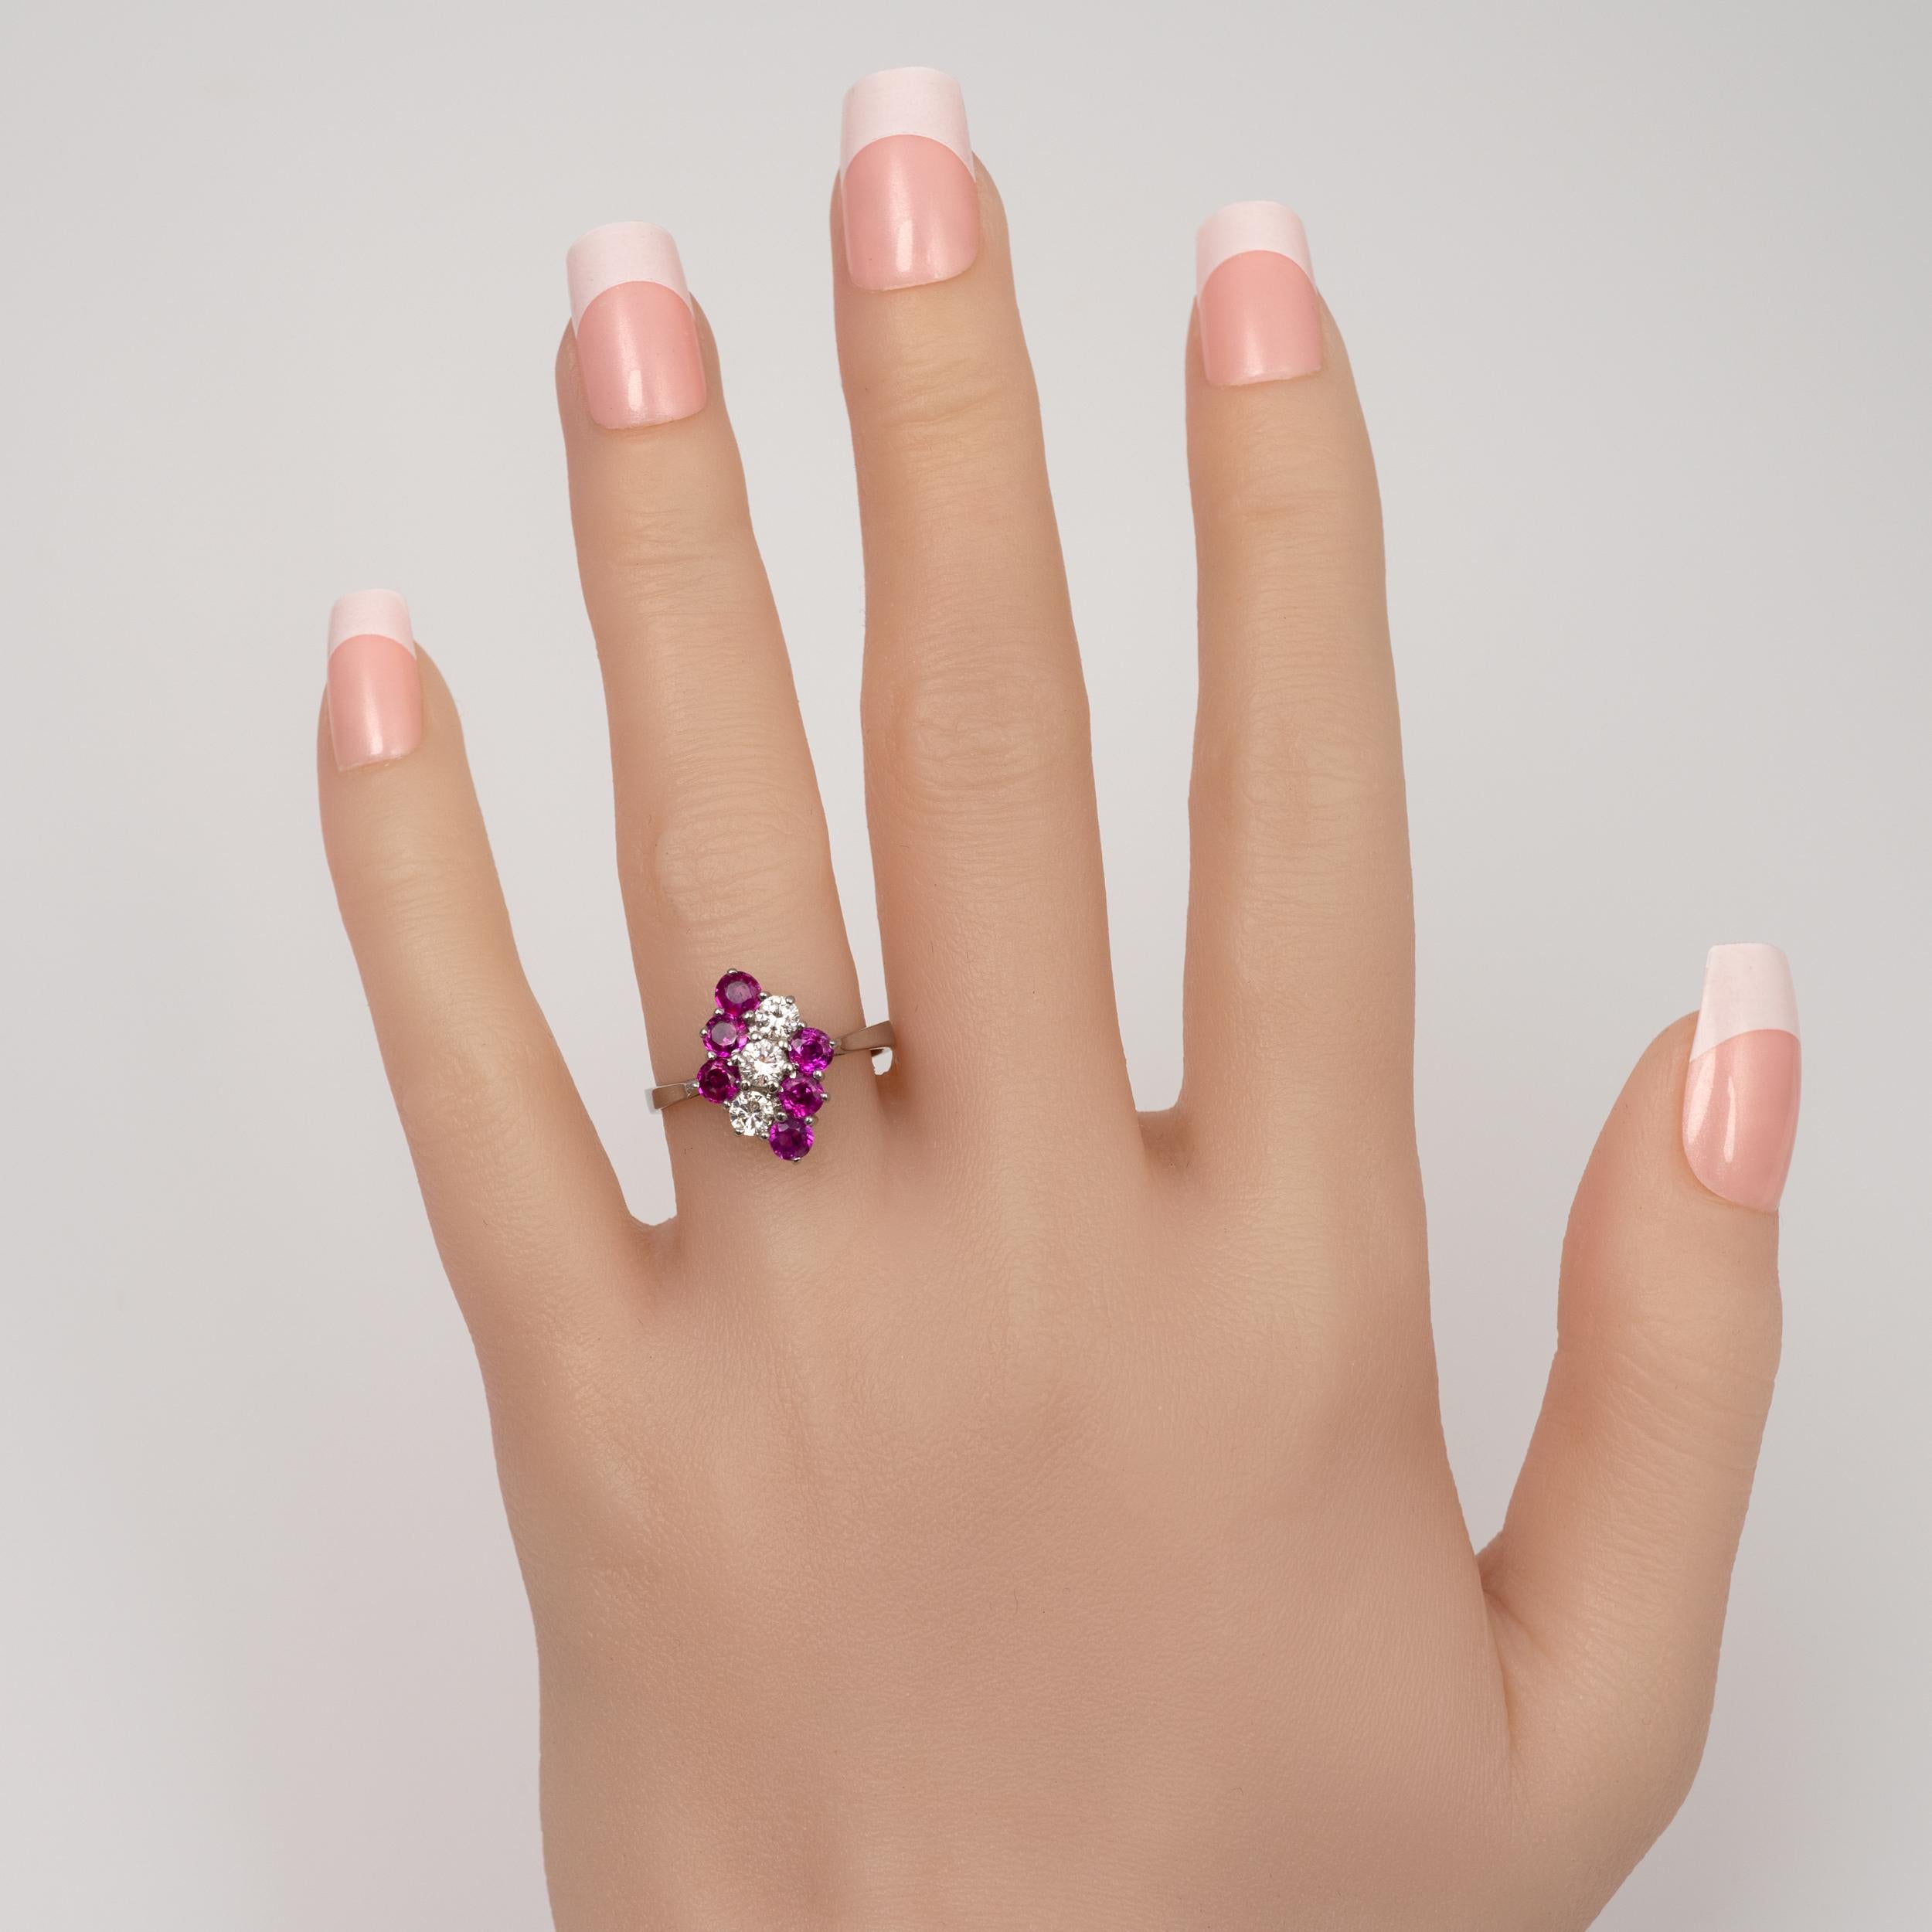 This pink tourmaline and diamond ring is beautifully crafted in 18k white gold and features 1.3 carats of sparkling gemstones neatly arranged into a diamond shape cluster.

The setting features a row of three round cut diamonds totaling approx 0.45